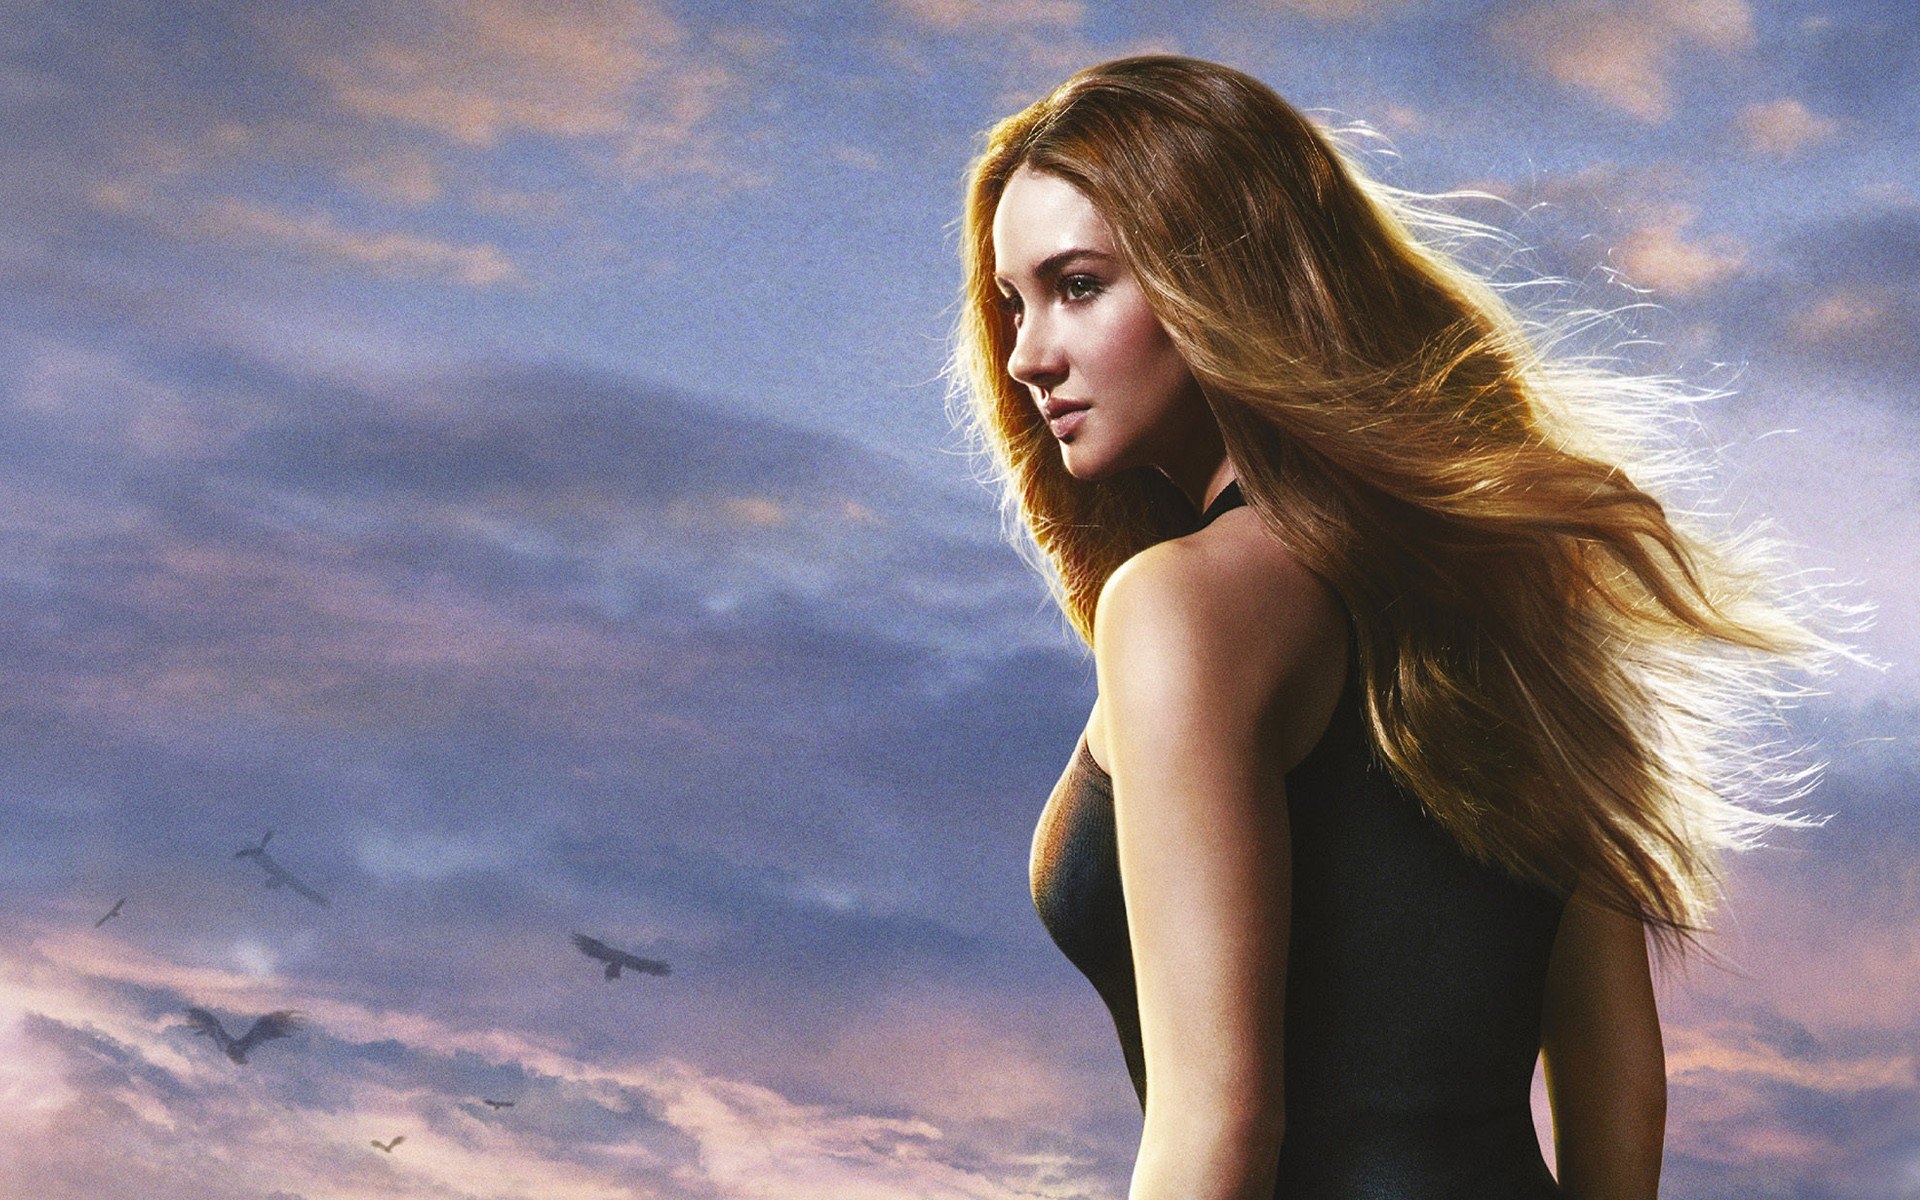 Shailene Woodley in Divergent, HD movies, Futuristic vibe, Must-see, 1920x1200 HD Desktop